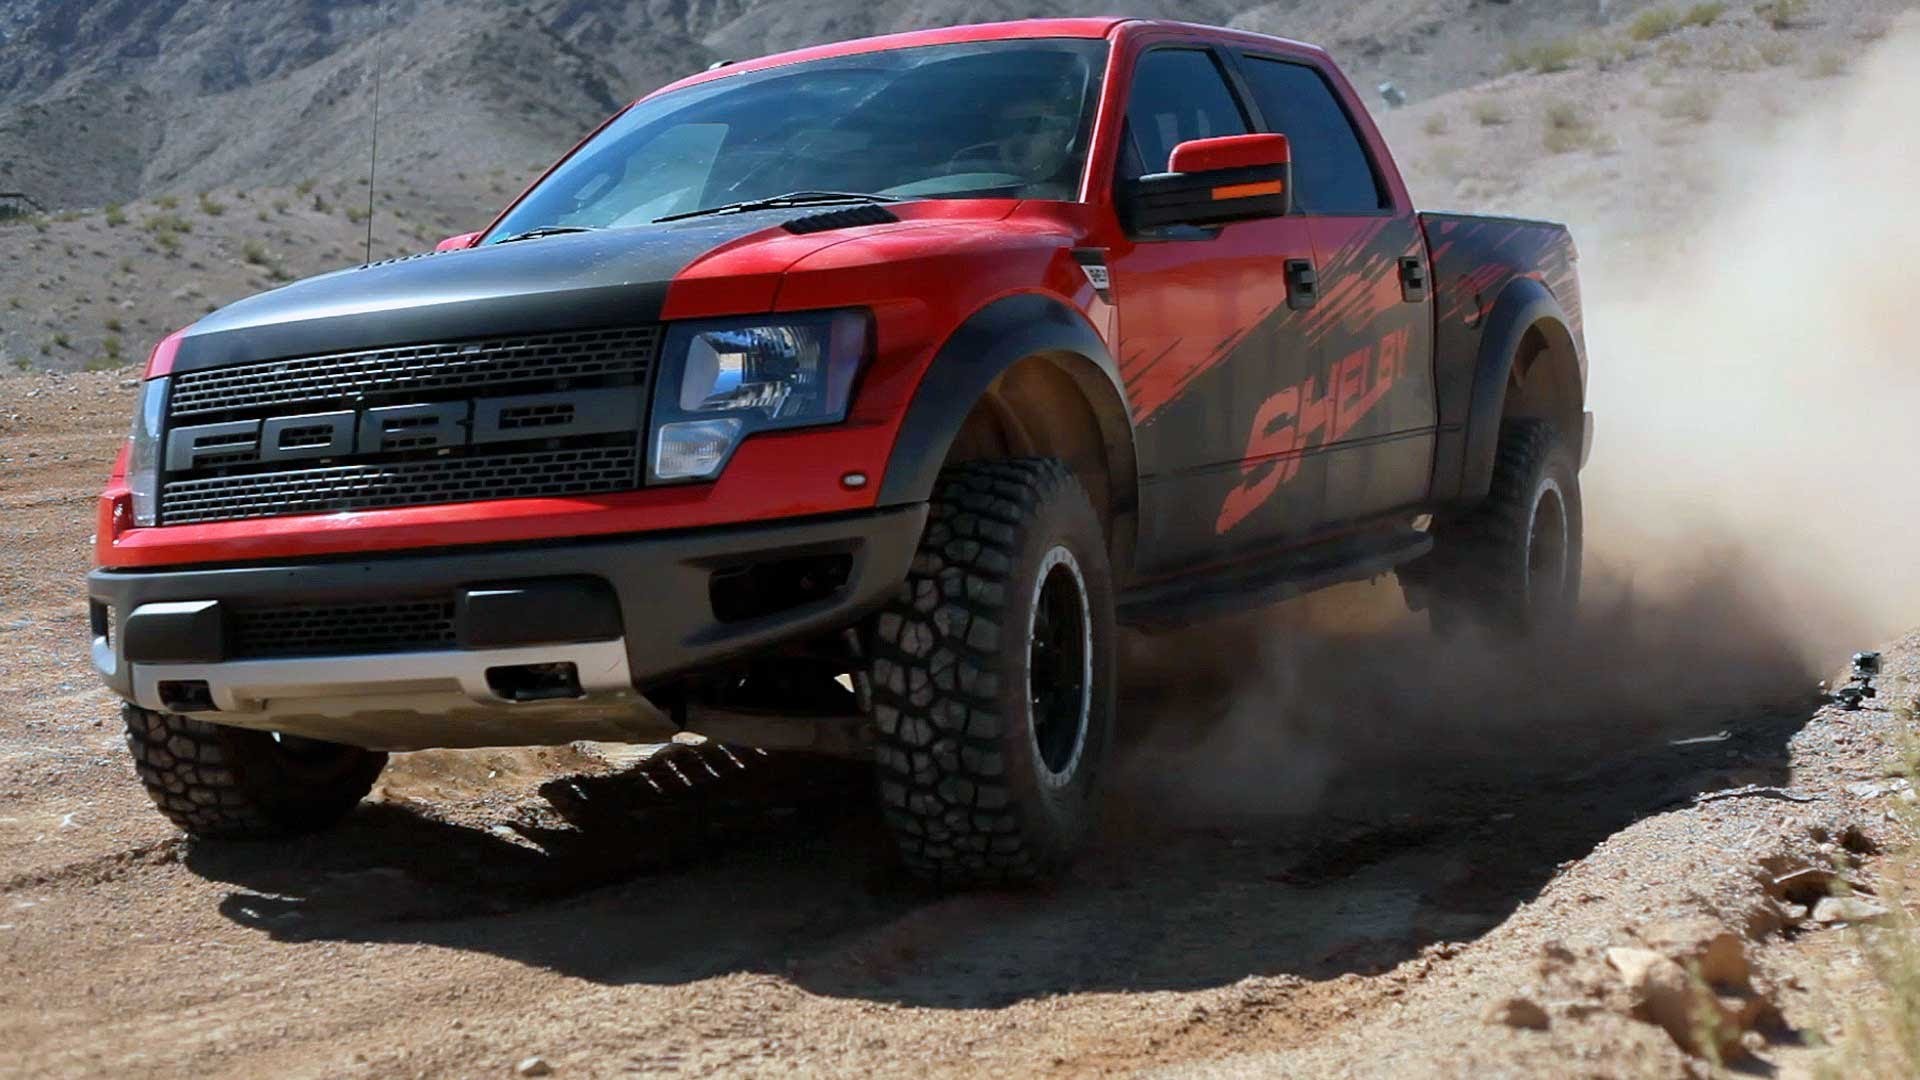 1920x1080 2015 Ford Raptor Wallpapers for Laptops